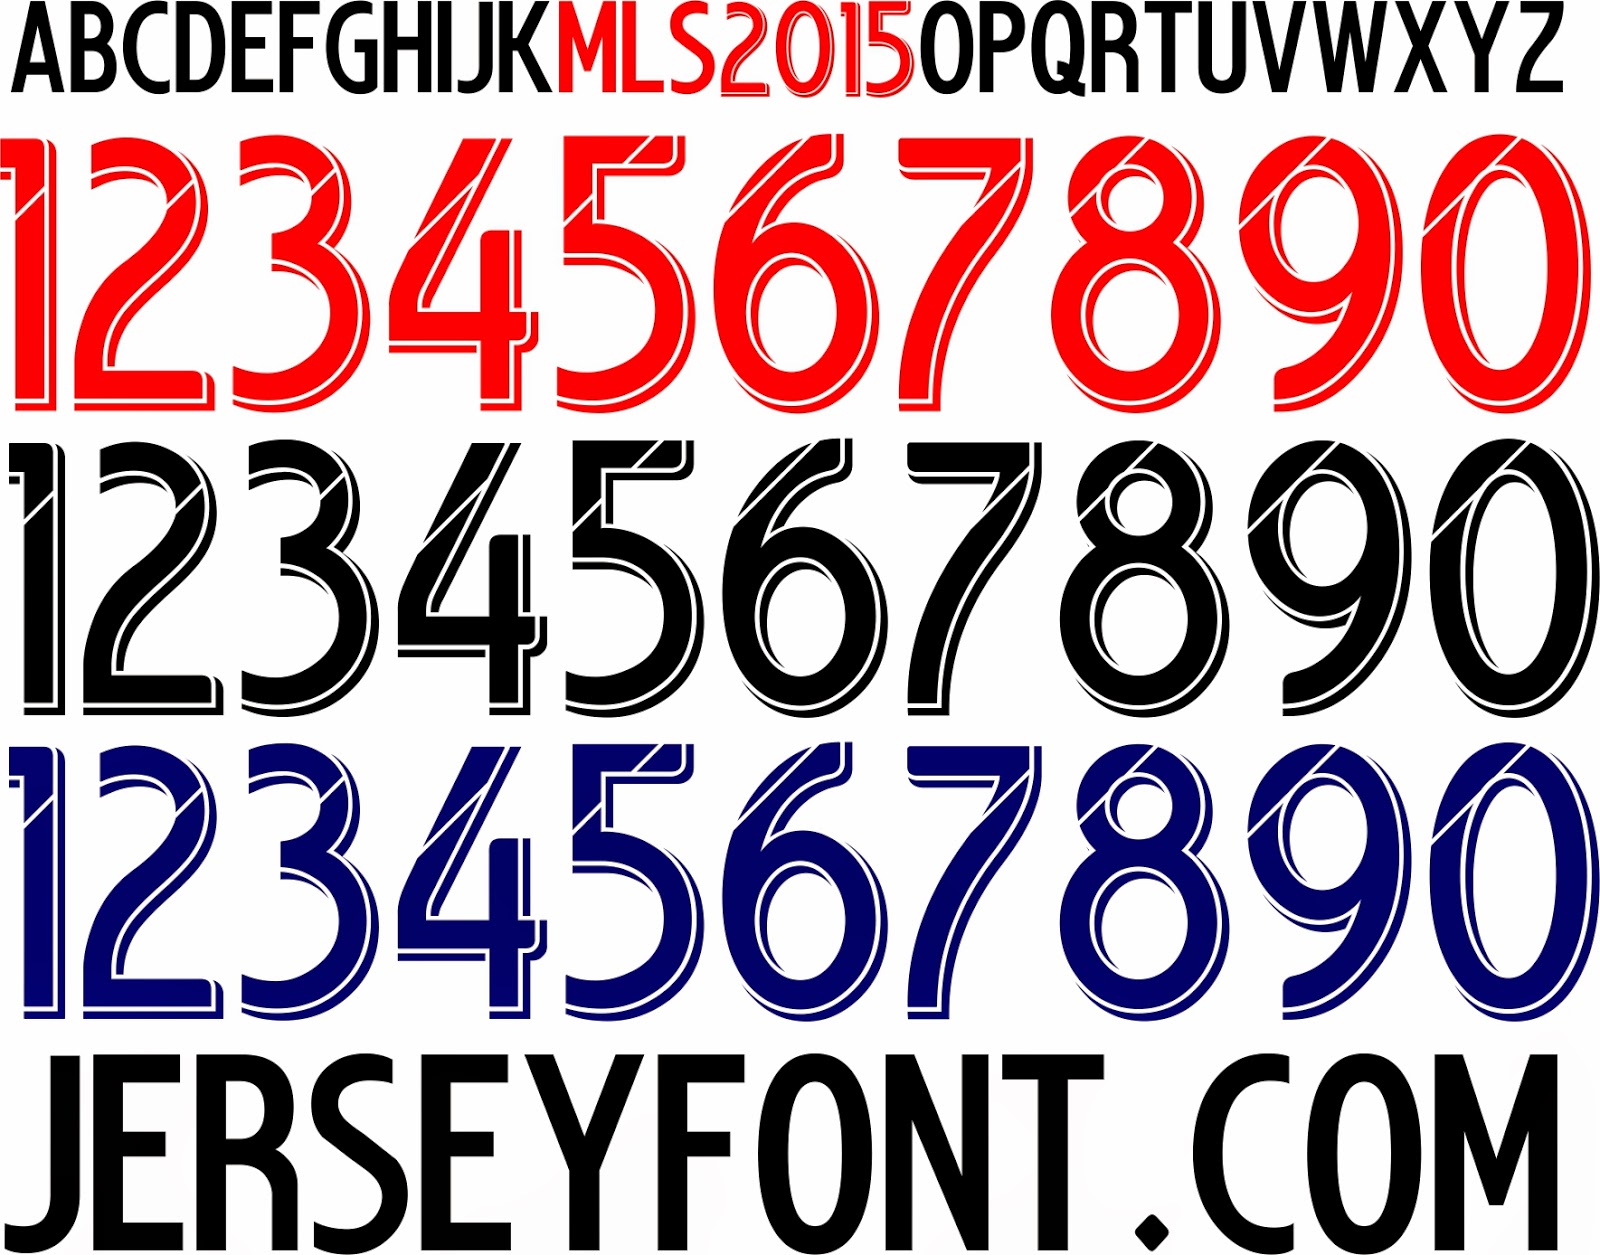 free download font liverpool ucl